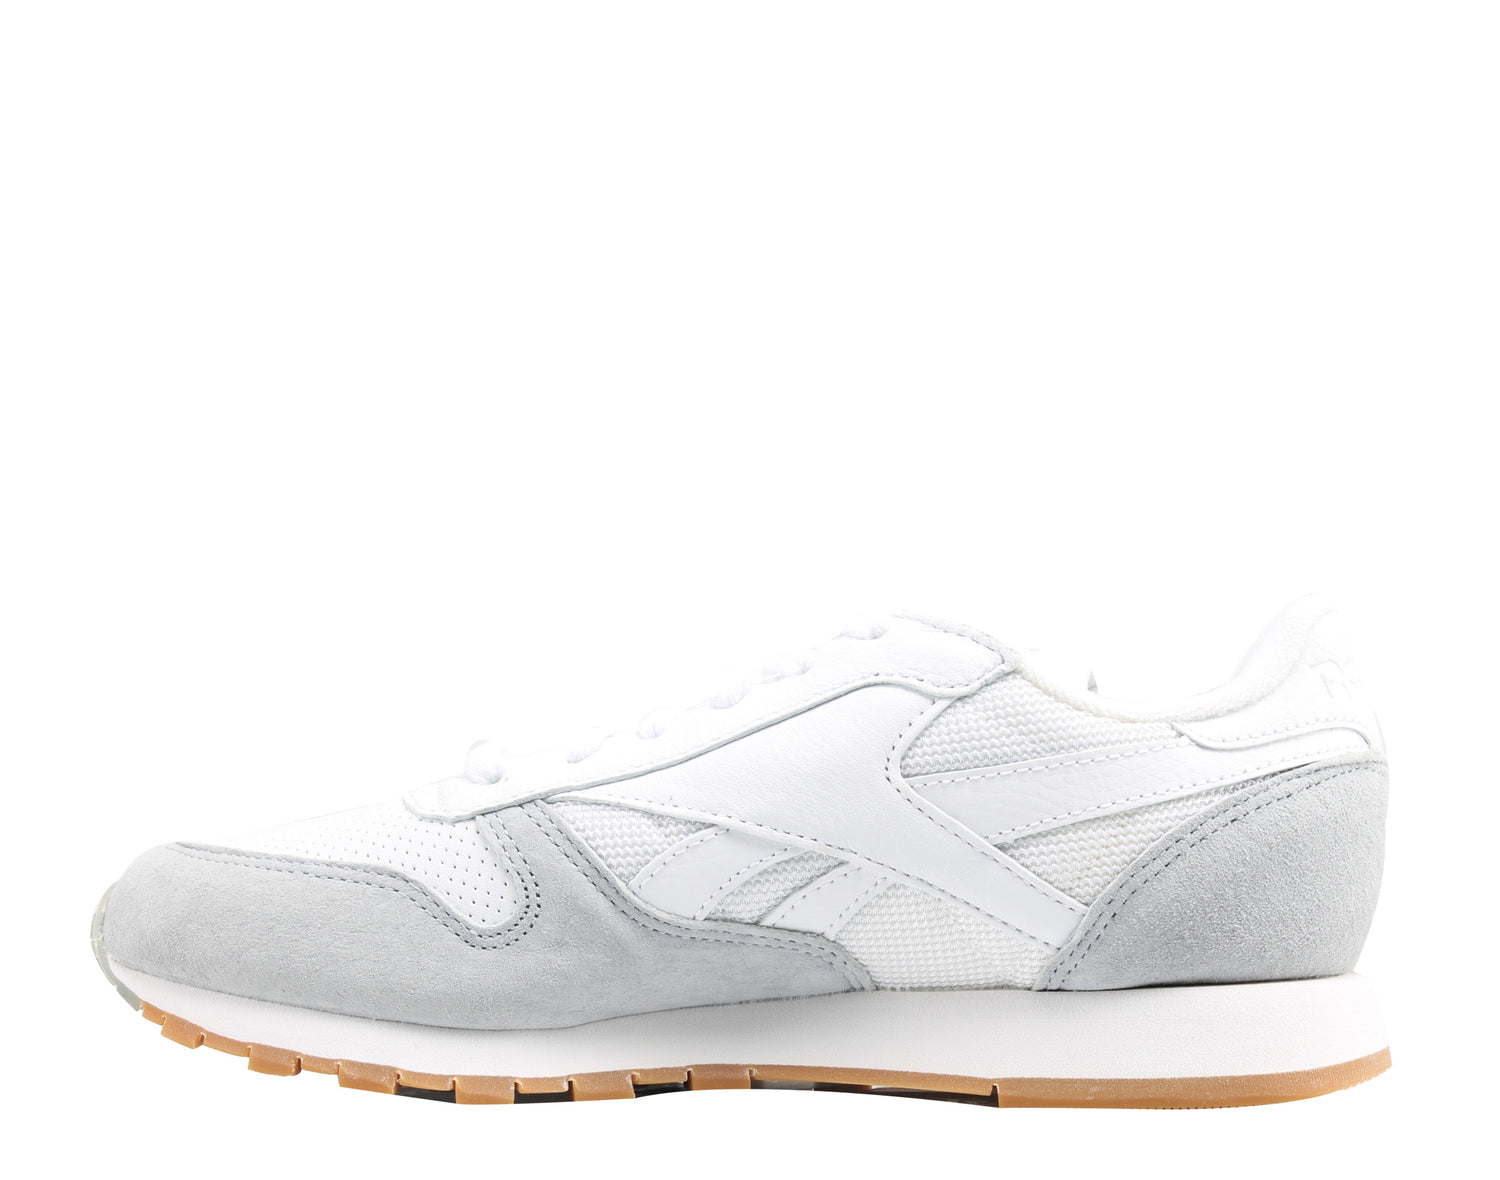 Reebok Classic Leather SPP Women's Running Shoes